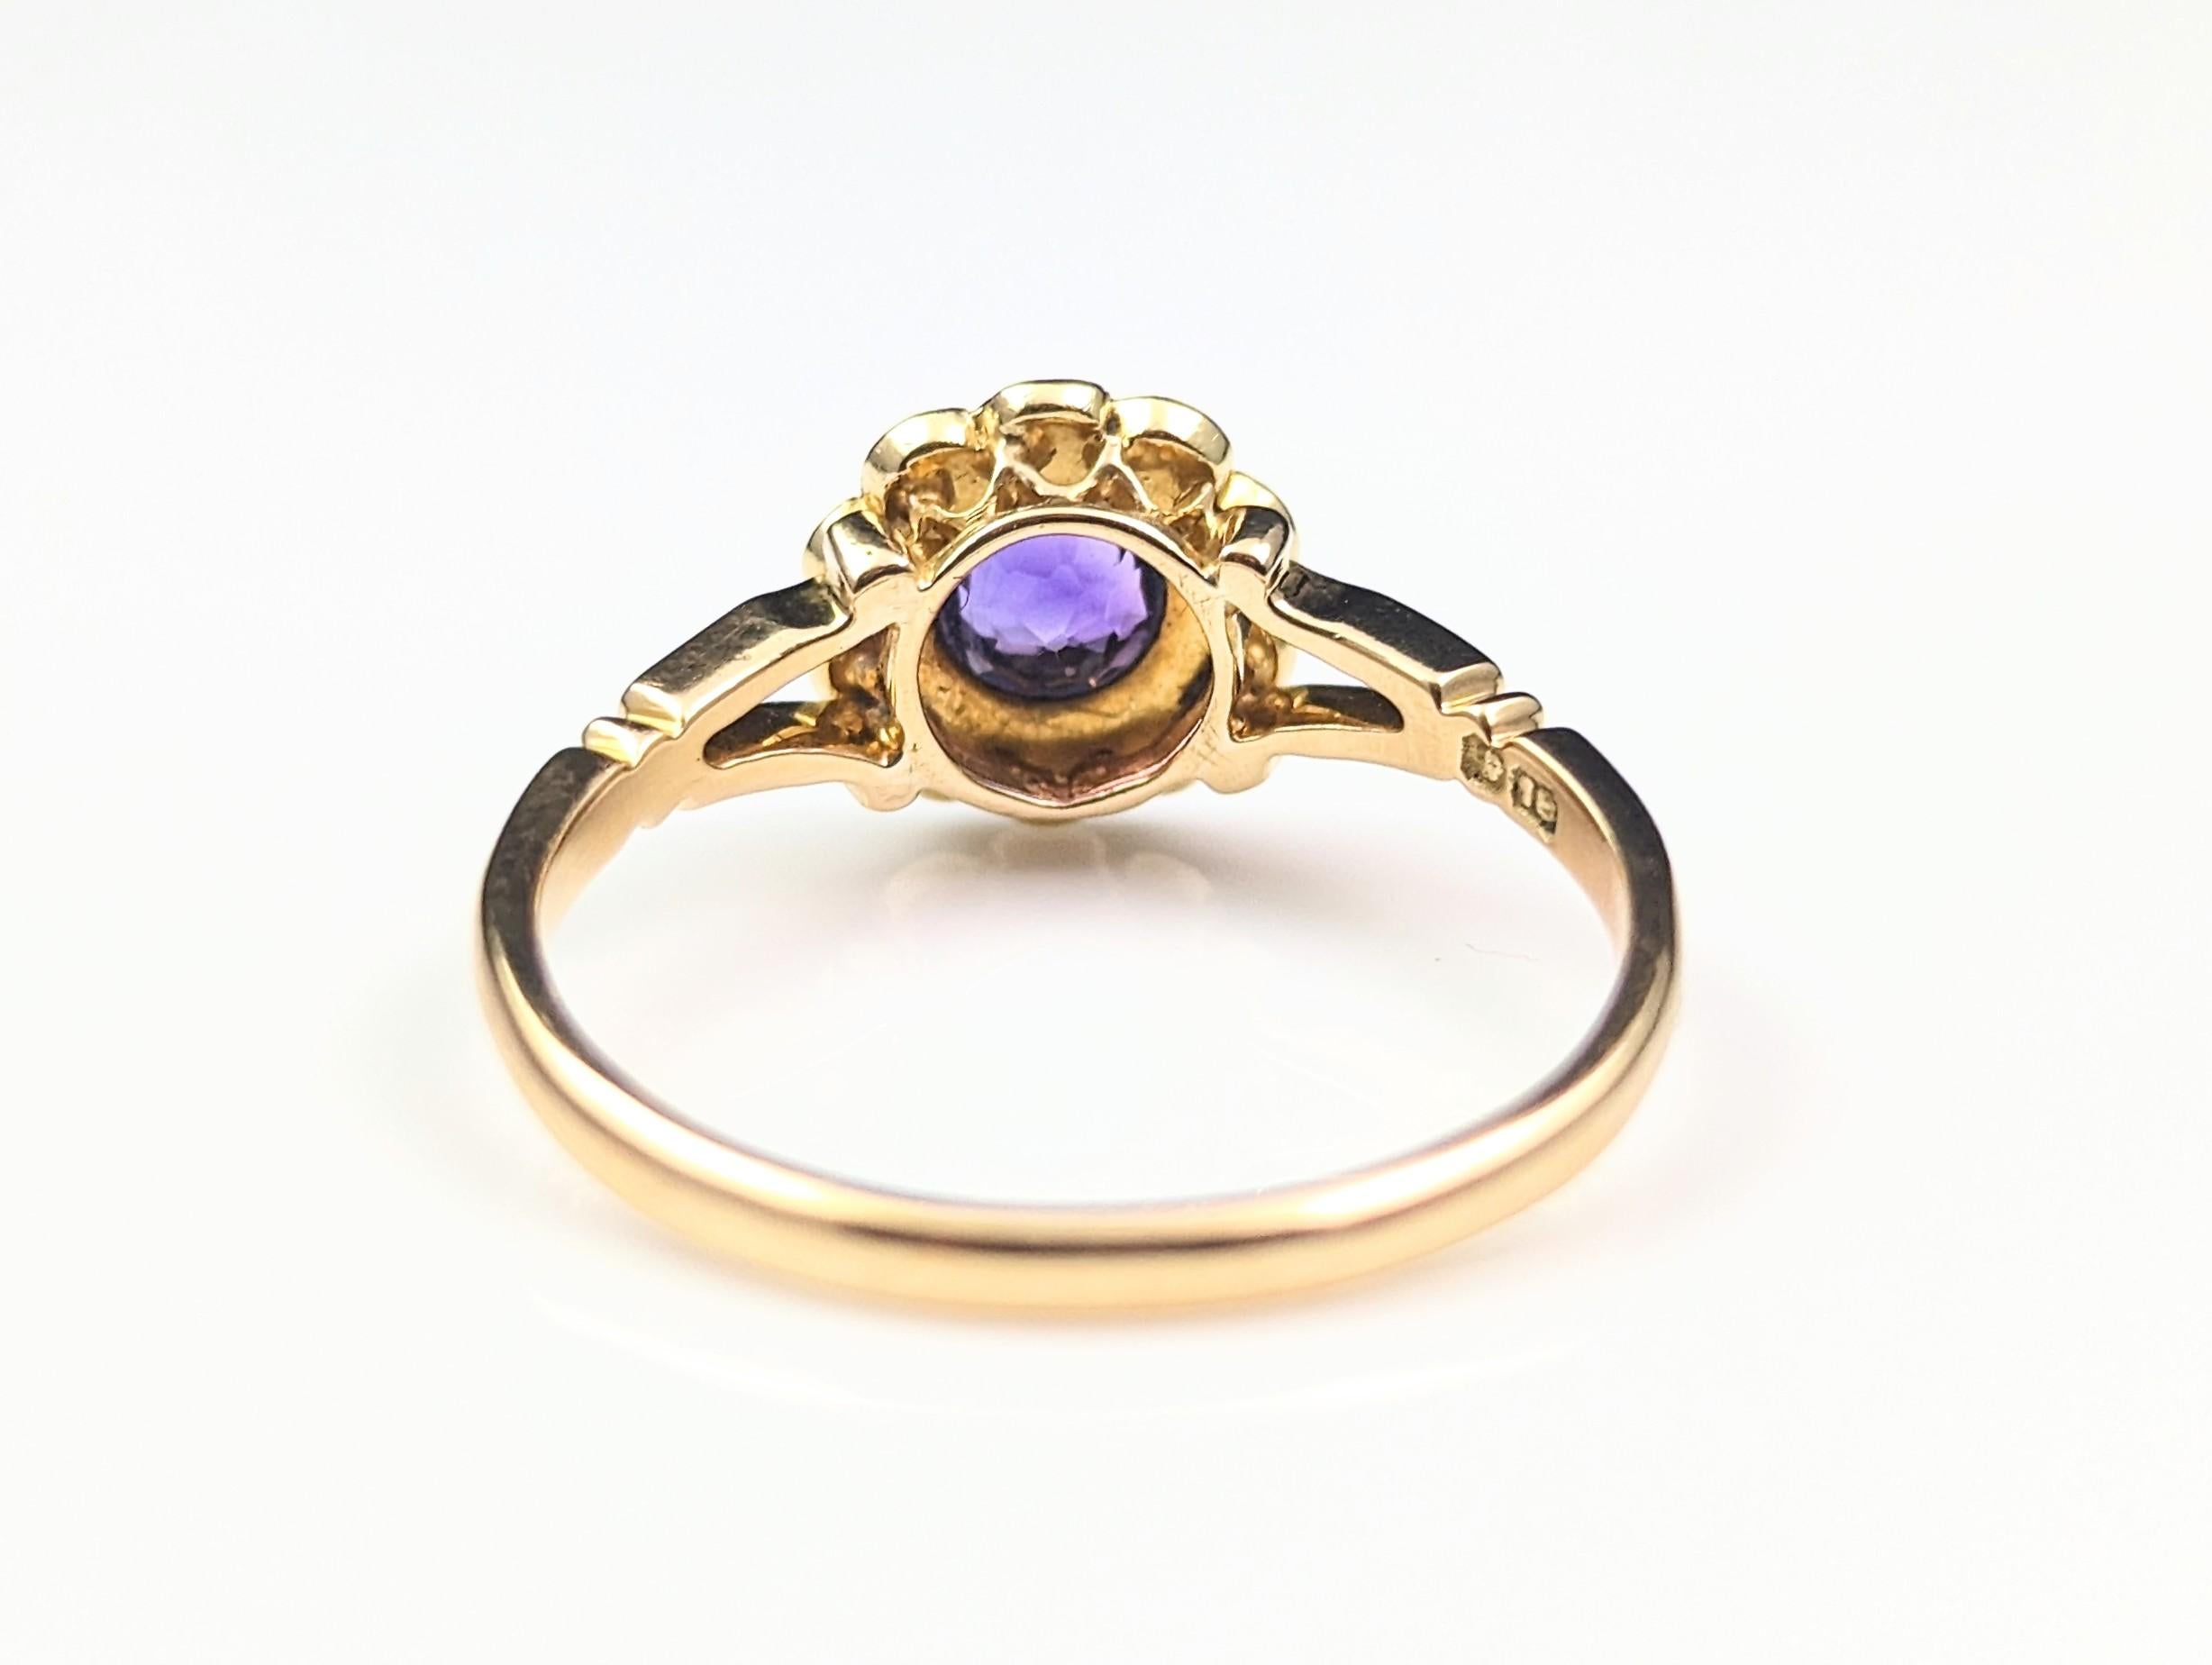 Antique 18k Gold Amethyst and Pearl Cluster Ring, Floral For Sale 5